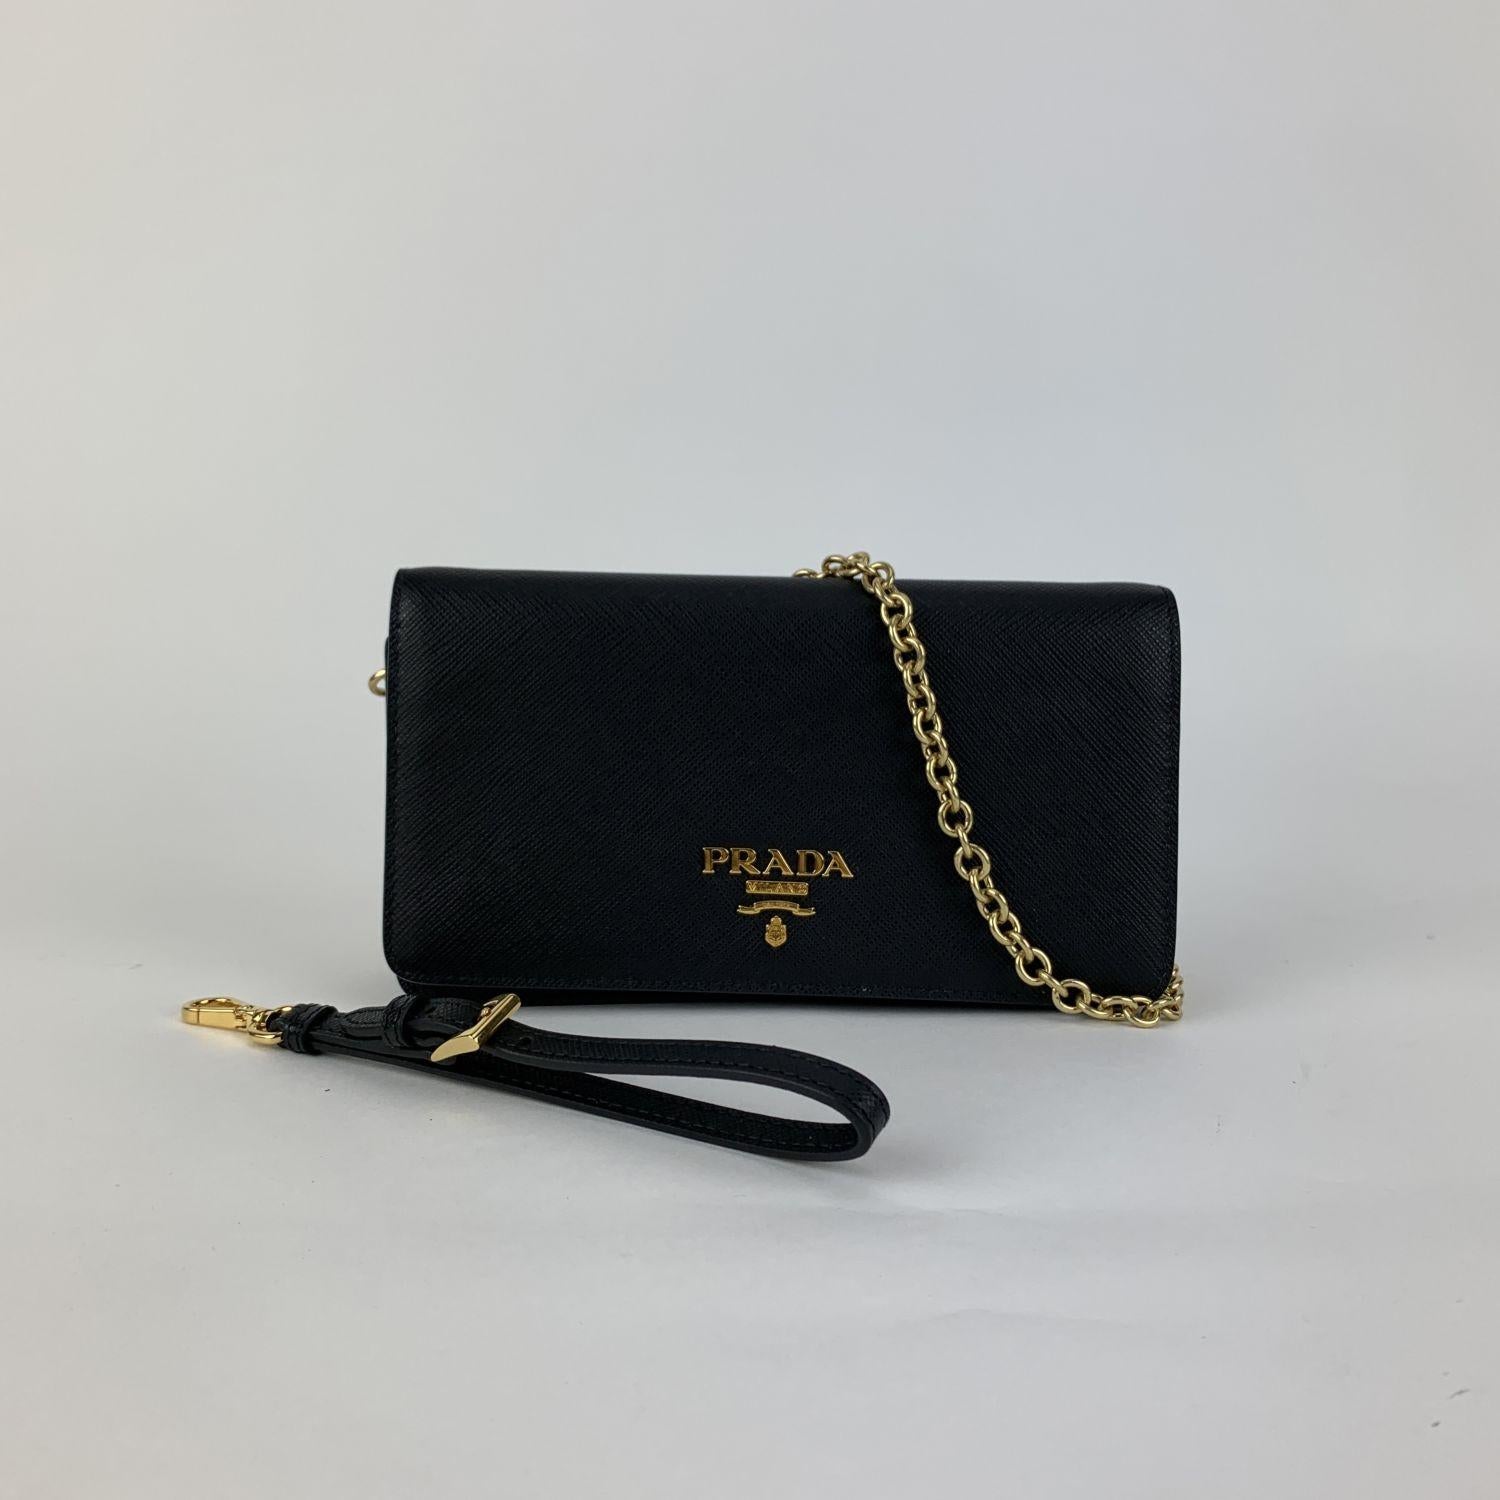 Prada black Saffiano leather flap continental wallet on chain/WOC, mod. 1DH029. Gold metal hardware. PRADA Metal lettering logo. Double magnetic button closure. 2 credit card slots. 1 coin compartment with zipper, 2 bill compartment and 3 open